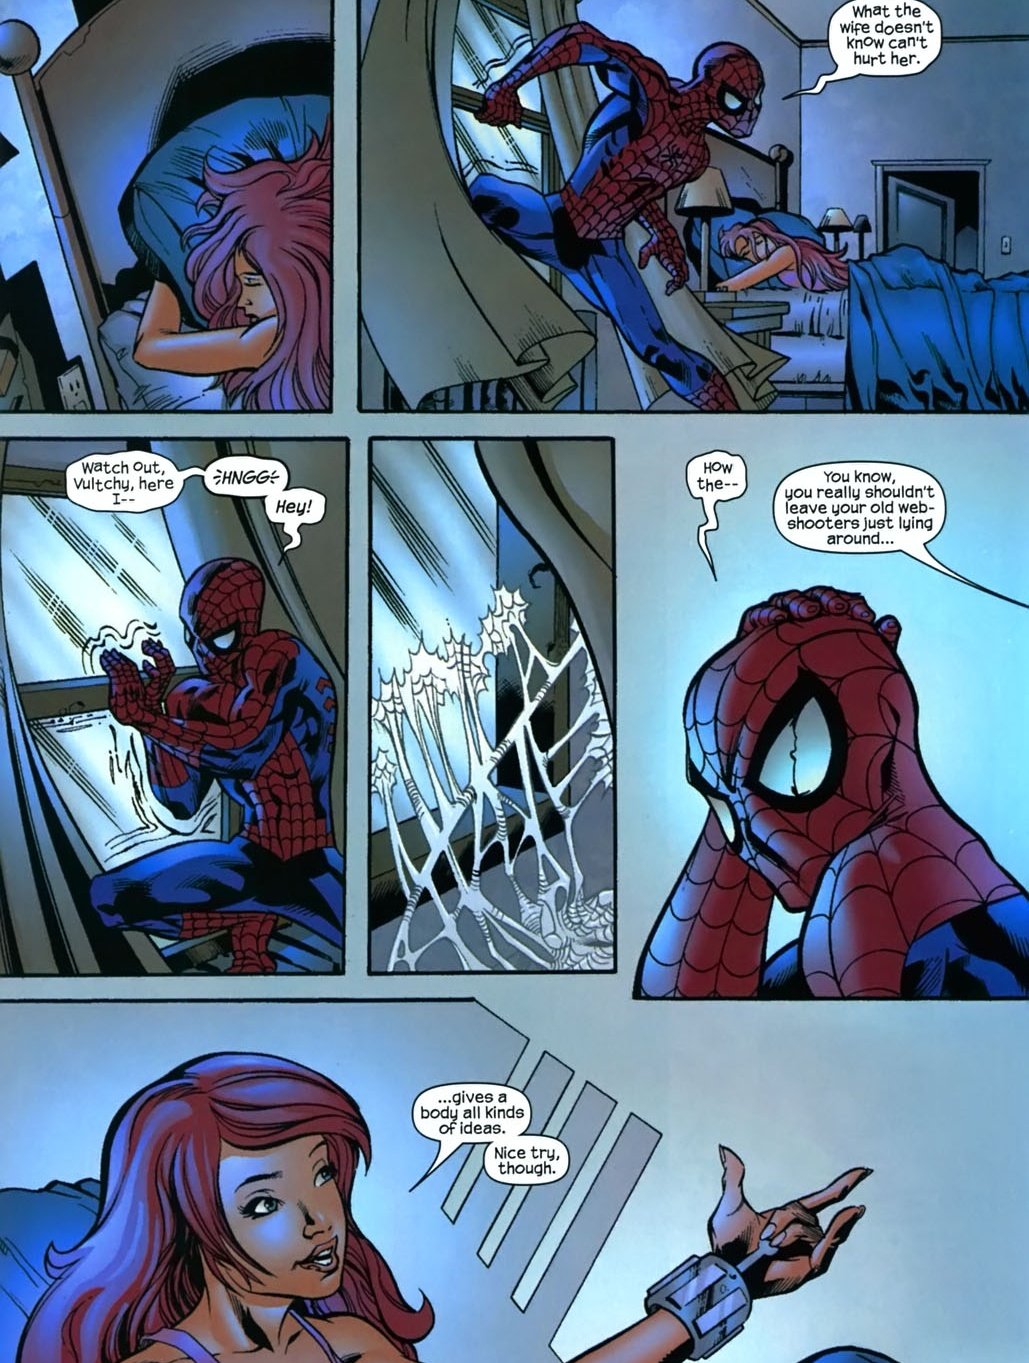 mj and Spider-man are the best by SkulduggeryBB on DeviantArt